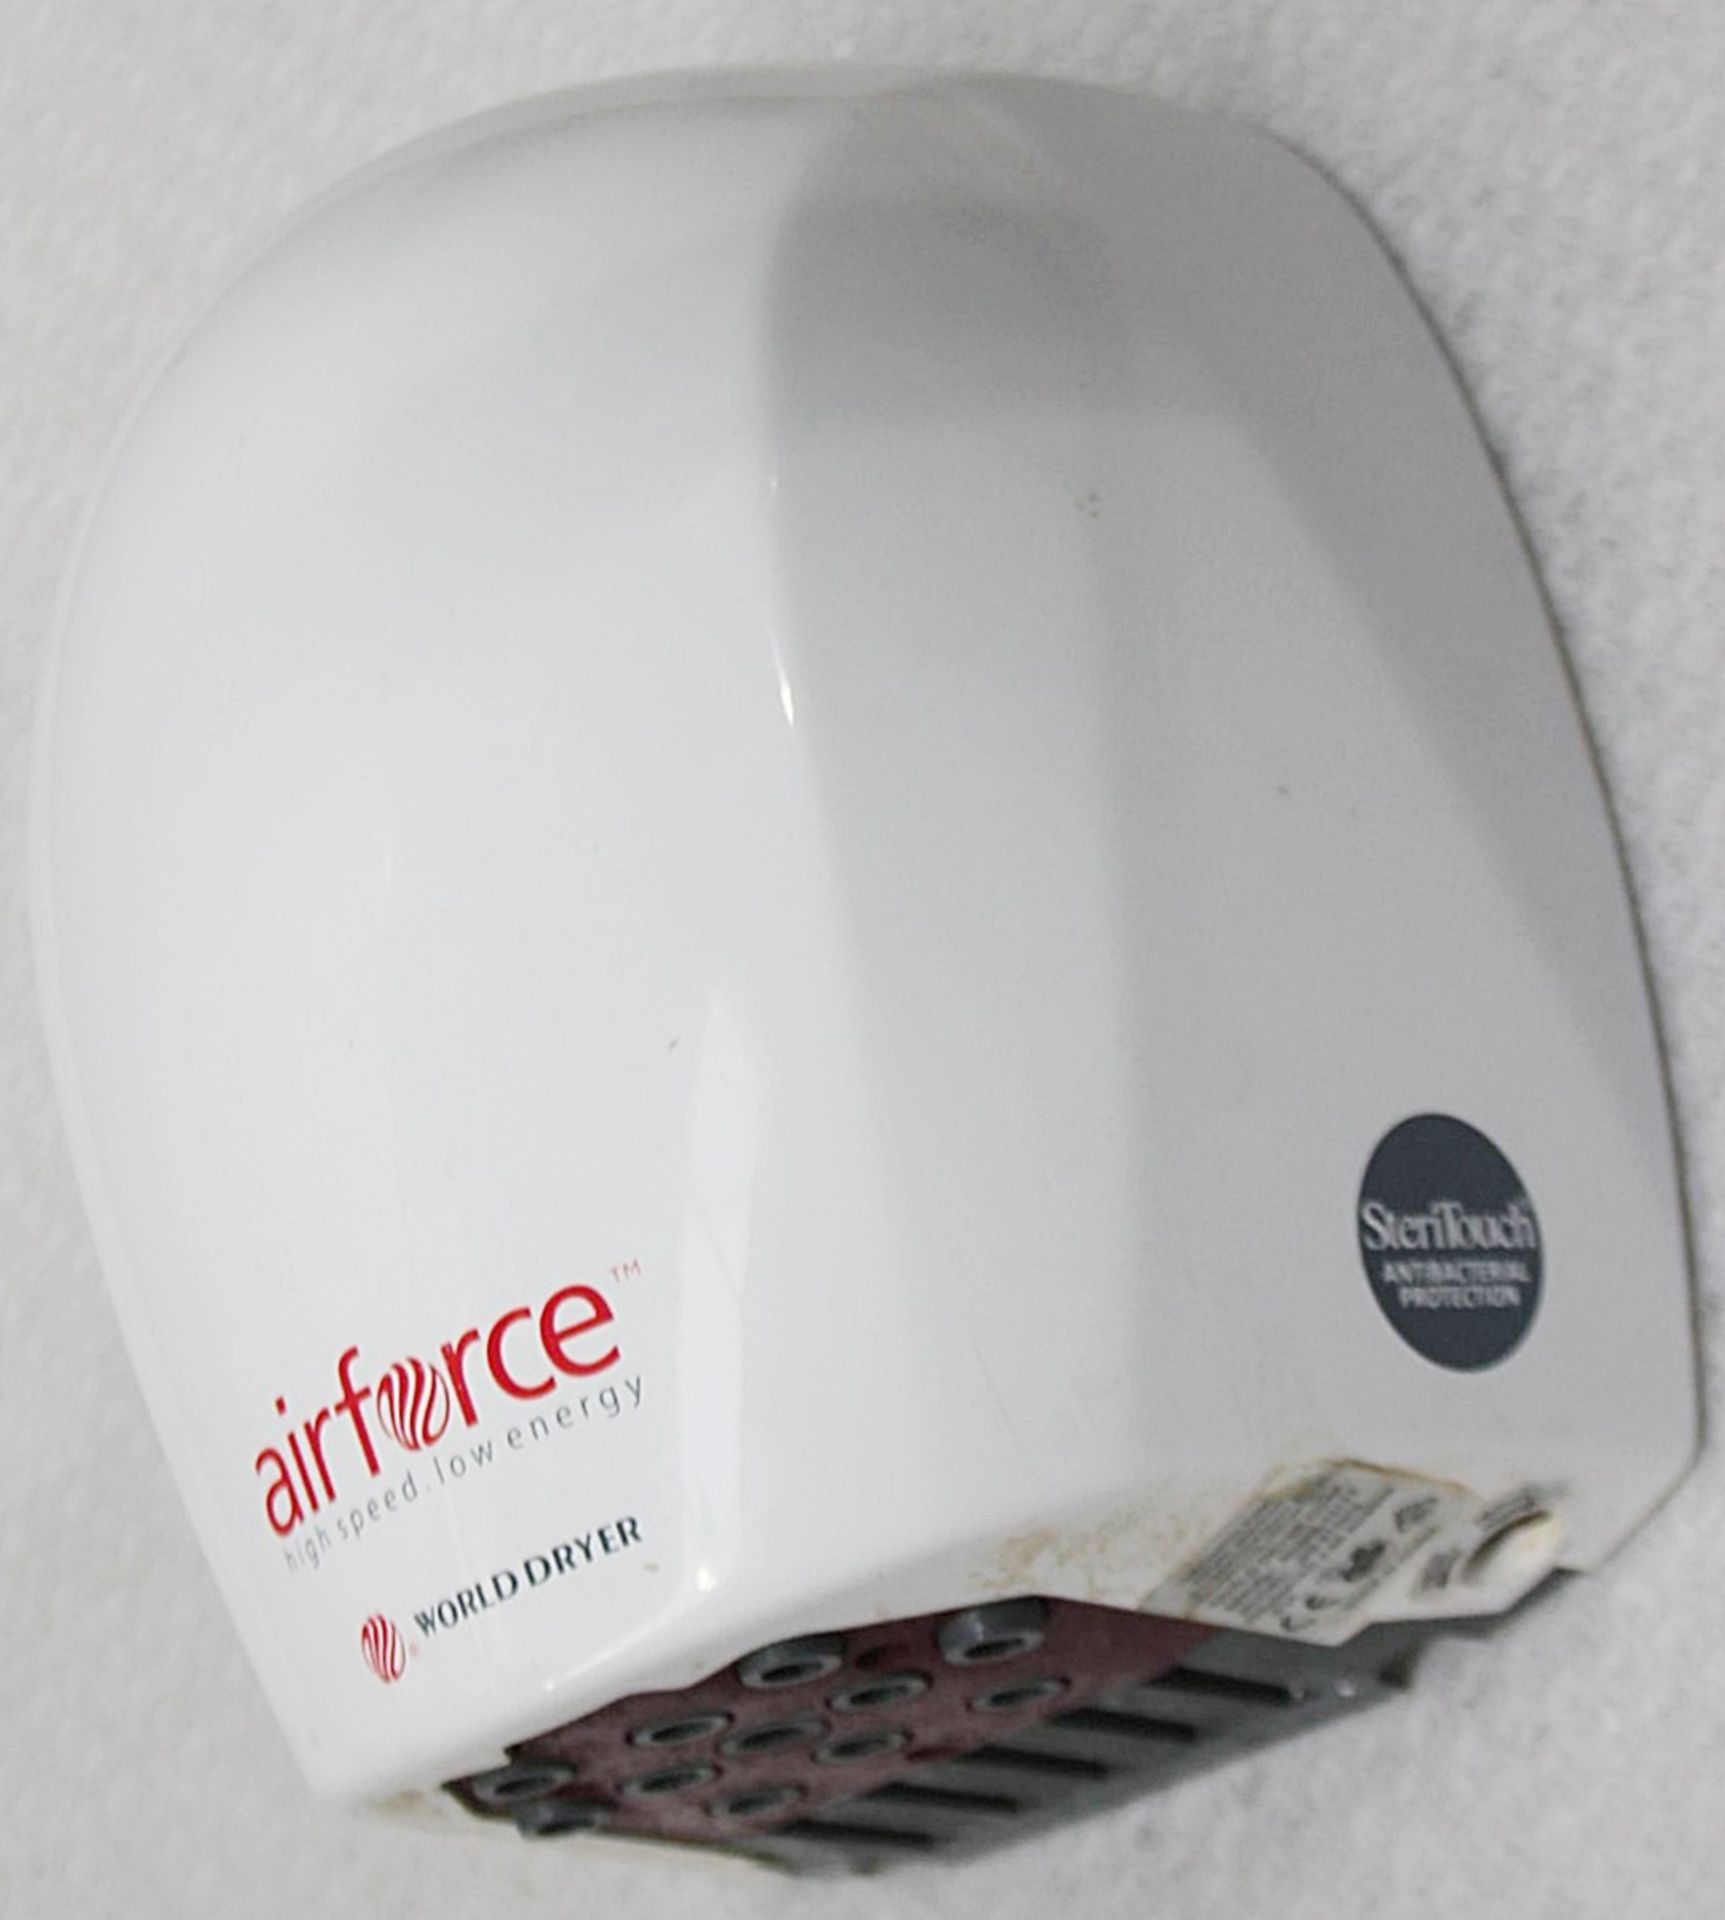 1 x Warner Howard 'Airforce' Commercial Hand Dryer In White - Original RRP £391.00 - Ref: GEN569 WH2 - Image 2 of 4